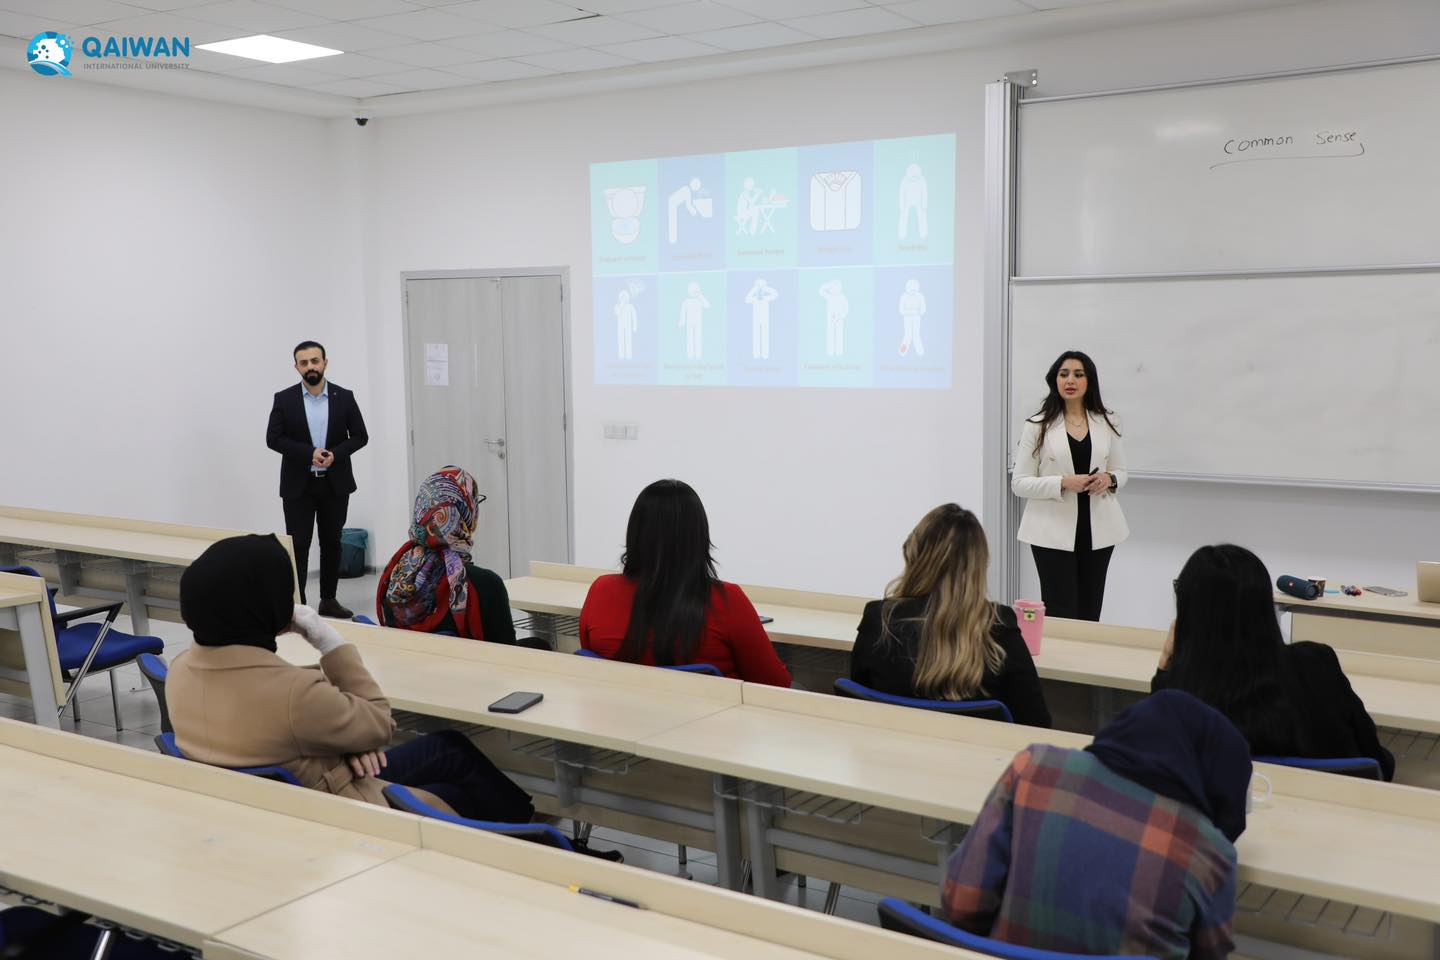 Pharmacy lecturers (Lara R. Al-Khafaf and Shad Adil) conducted a workshop on "Diabetes Prevention: Risk Prediction and Food labels Literacy"